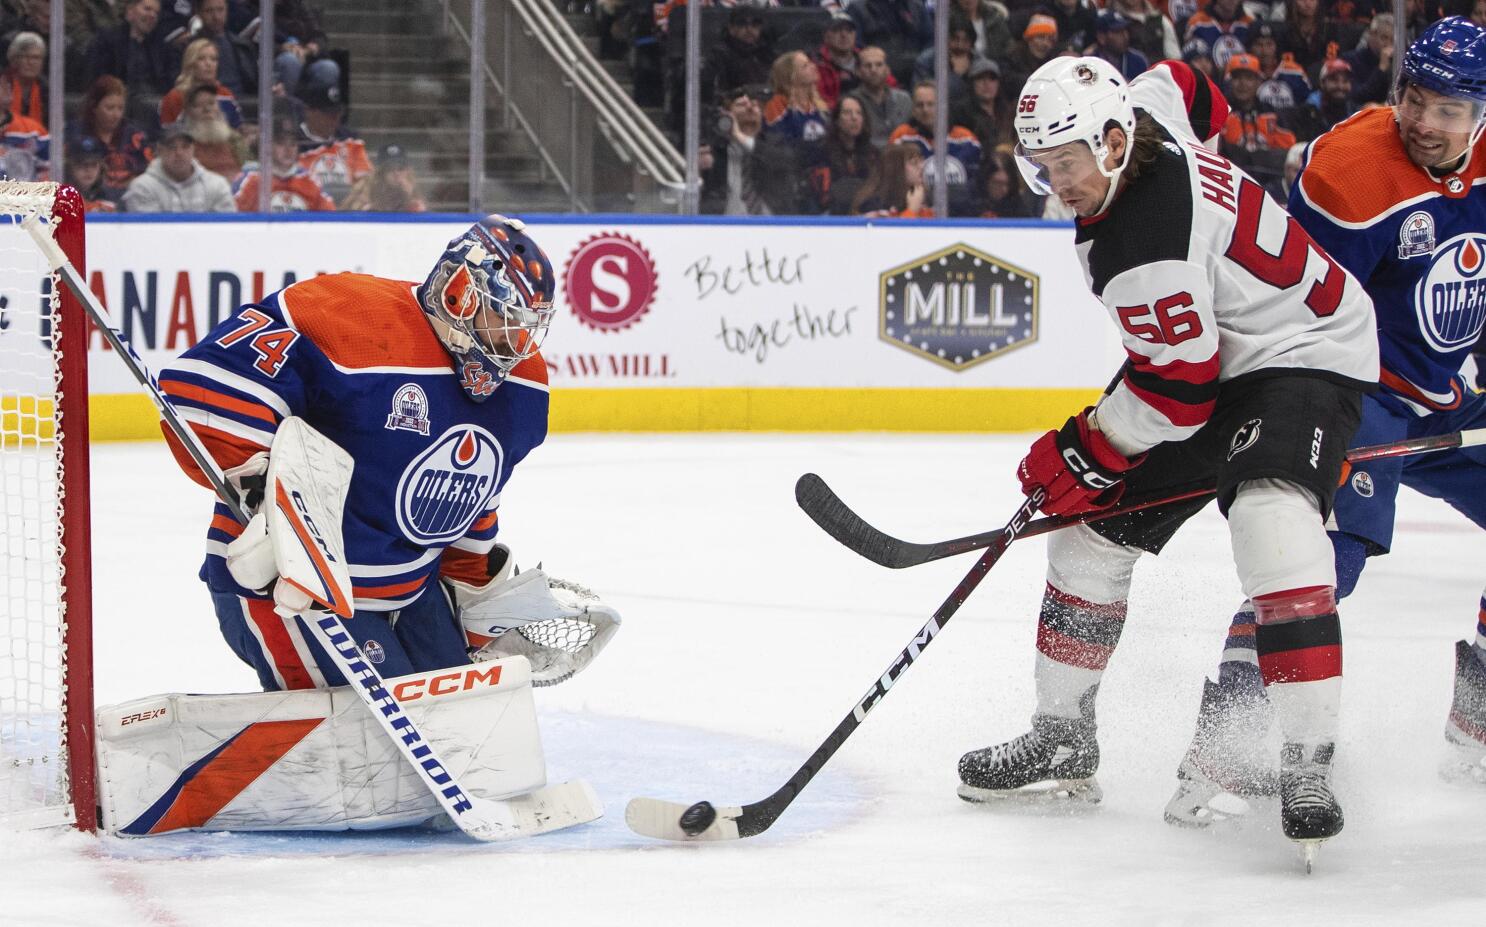 Devils rally to beat Oilers 4-3 for 5th straight win